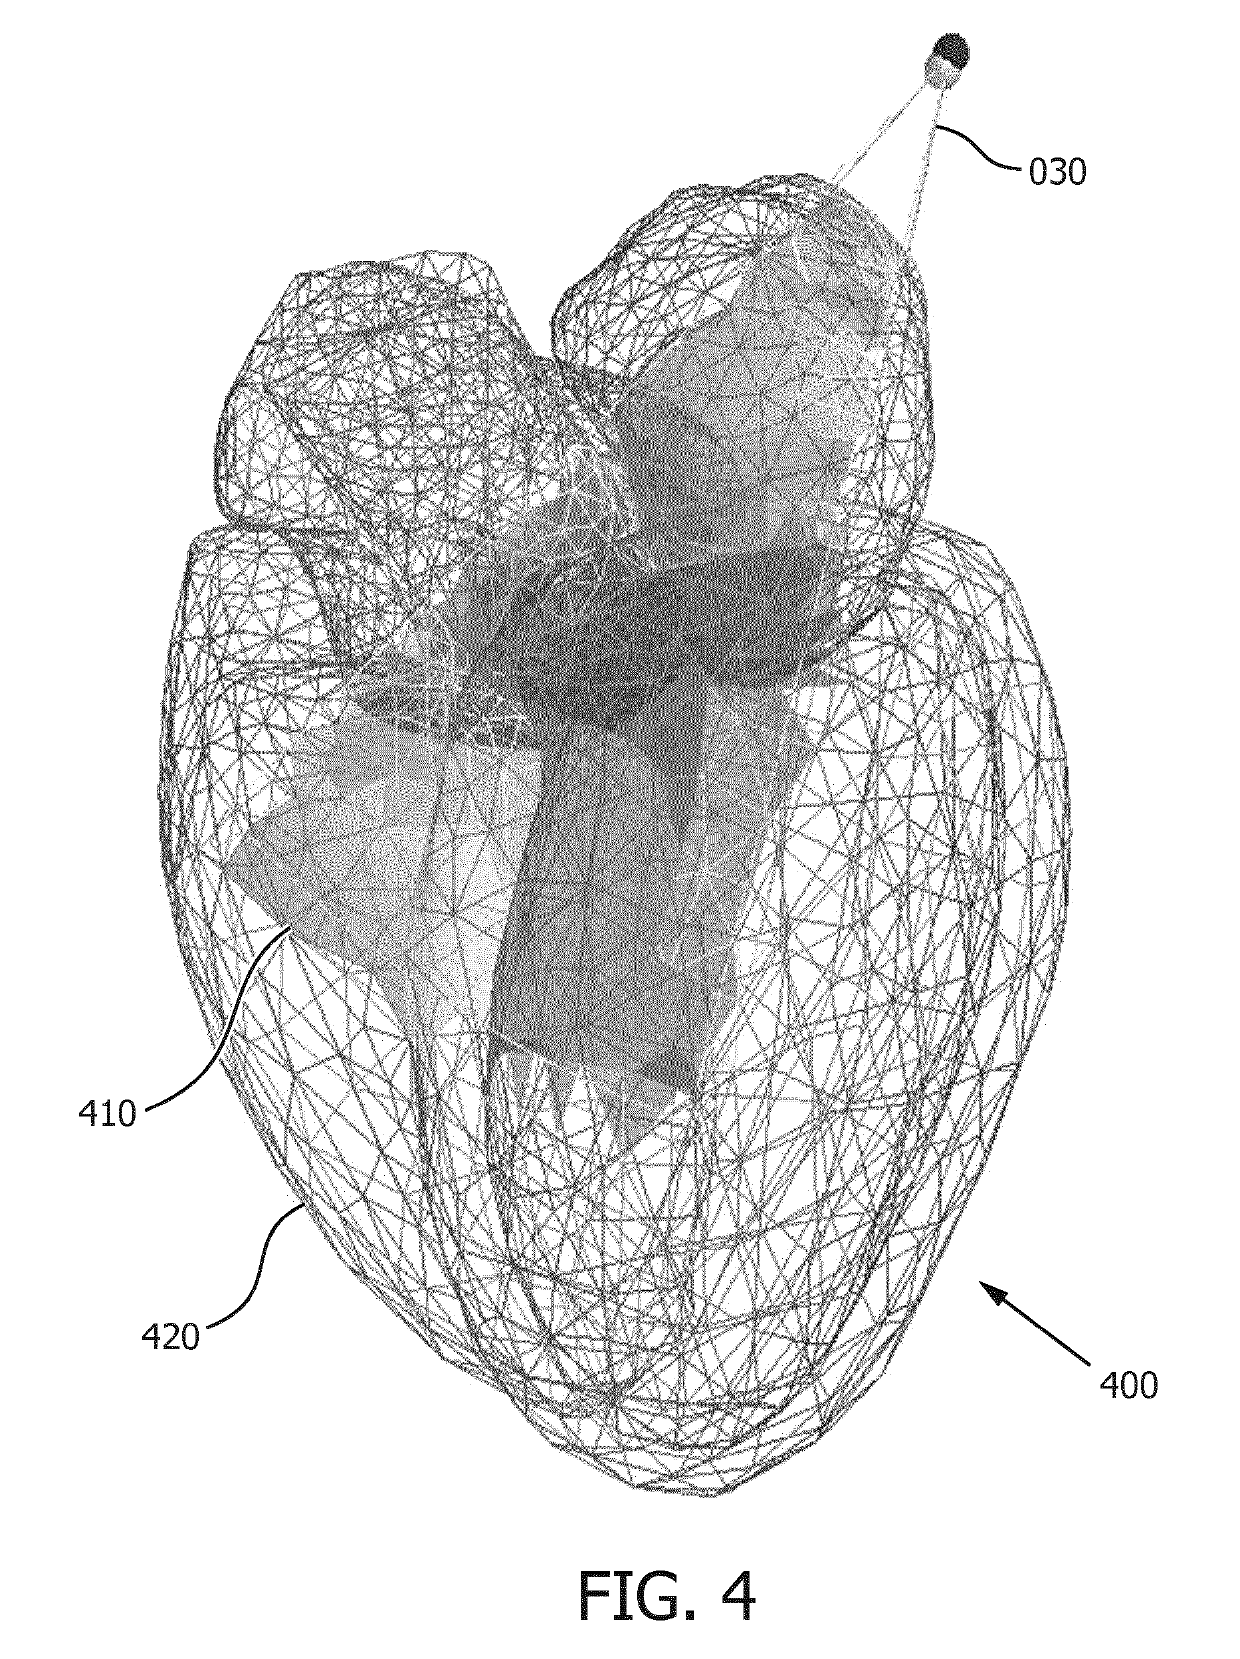 Model-based segmentation of an anatomical structure